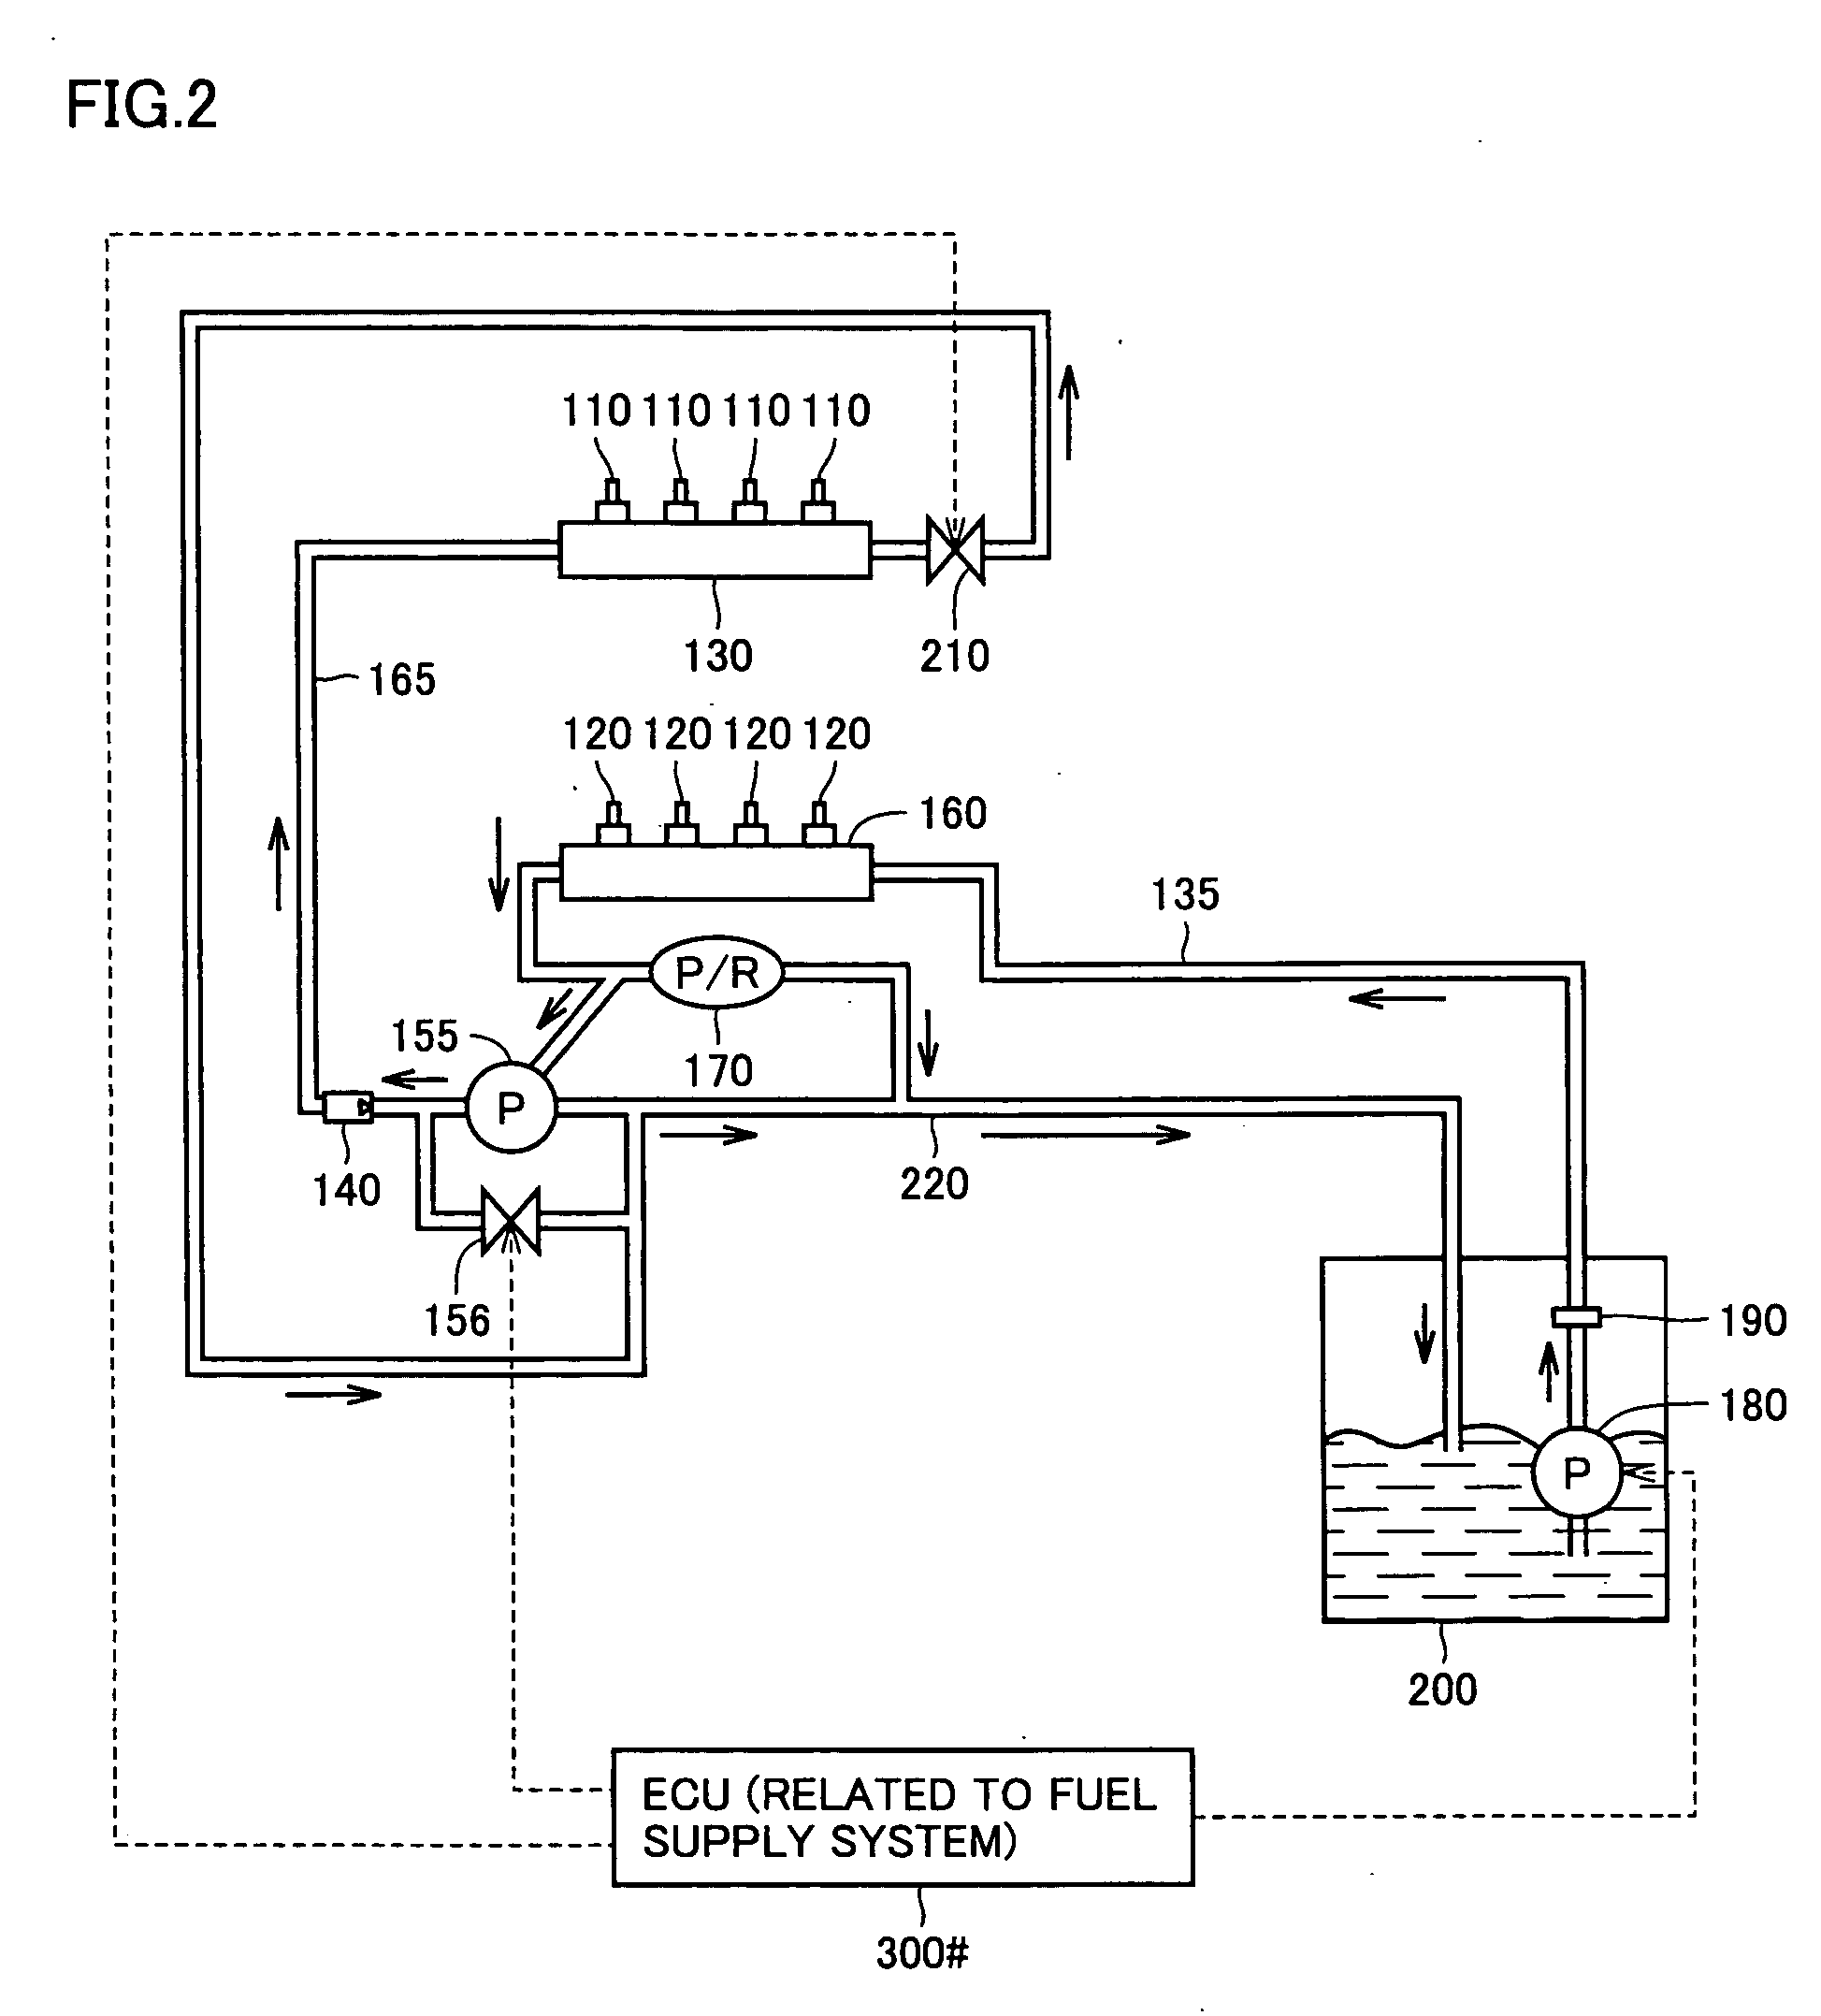 Fuel supply system for internal combustion engine